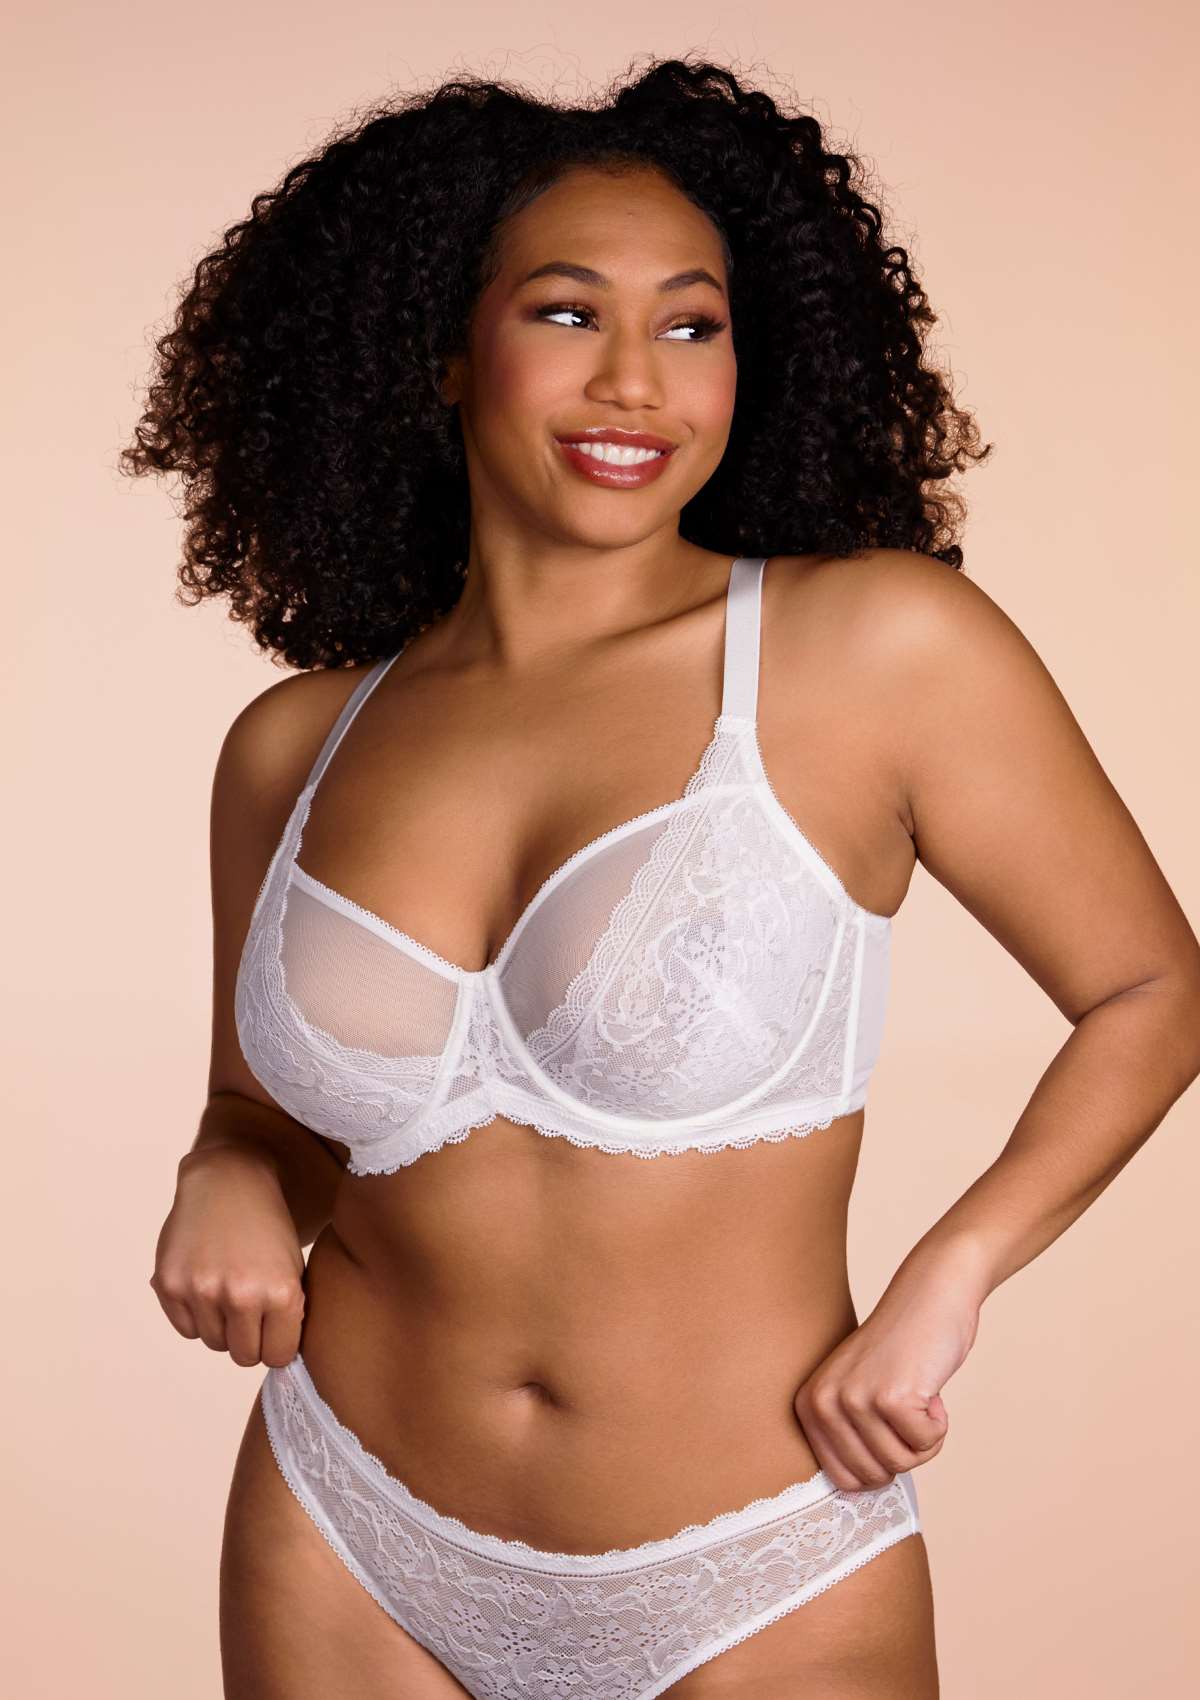 HSIA Anemone Big Bra: Best Bra For Lift And Support, Floral Bra - White / 38 / DDD/F